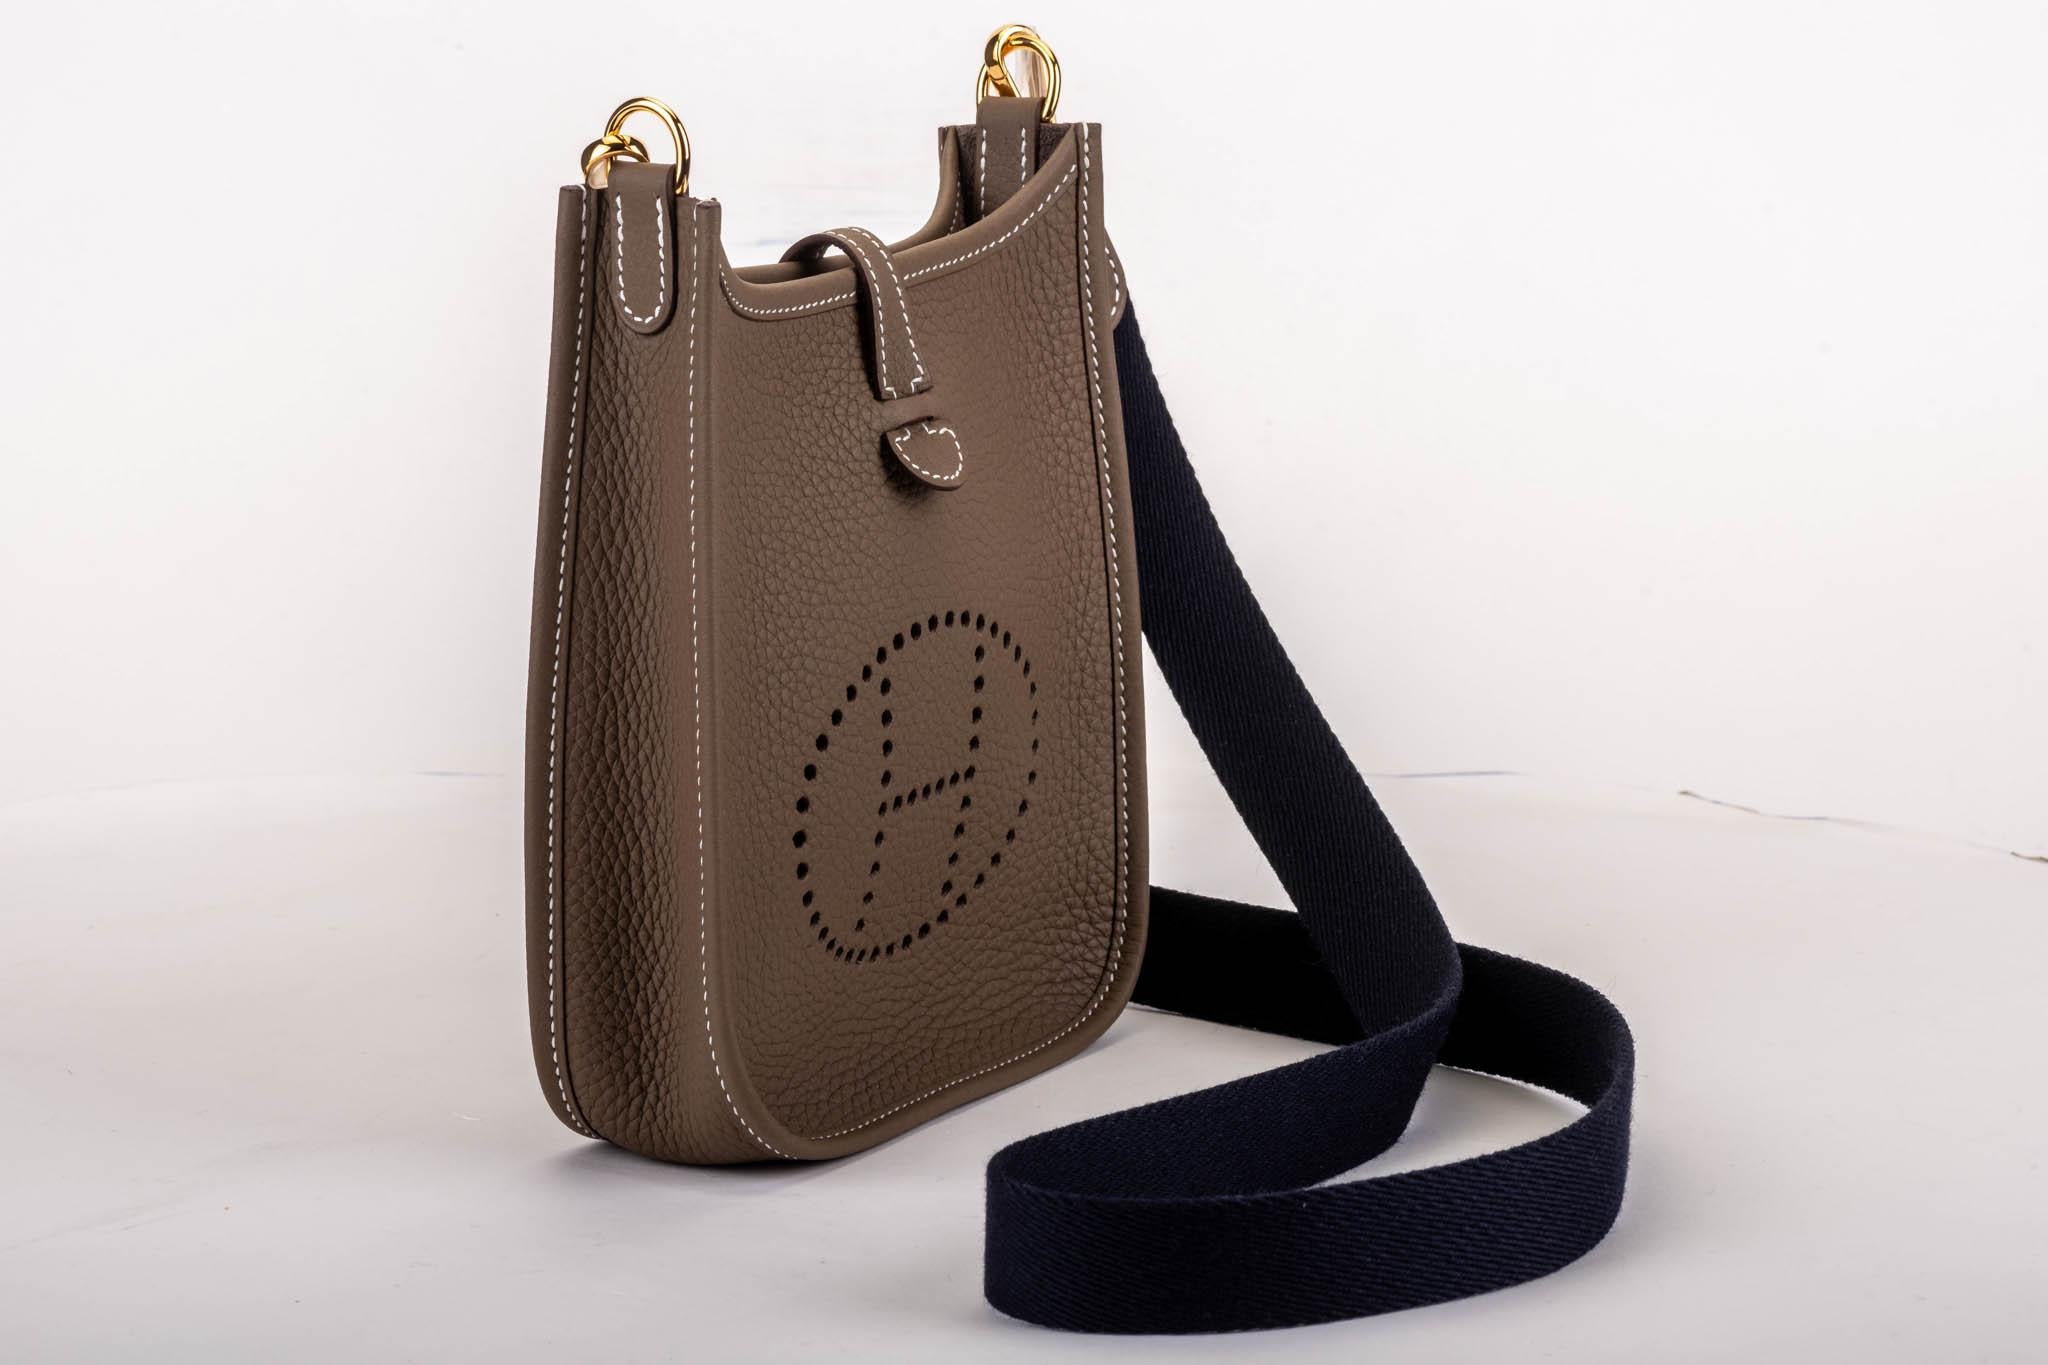 Hermès mini evelyne in etouoe clemence leather with gold tone hardware. Crossbody fabric strap in contrast navy color, 44